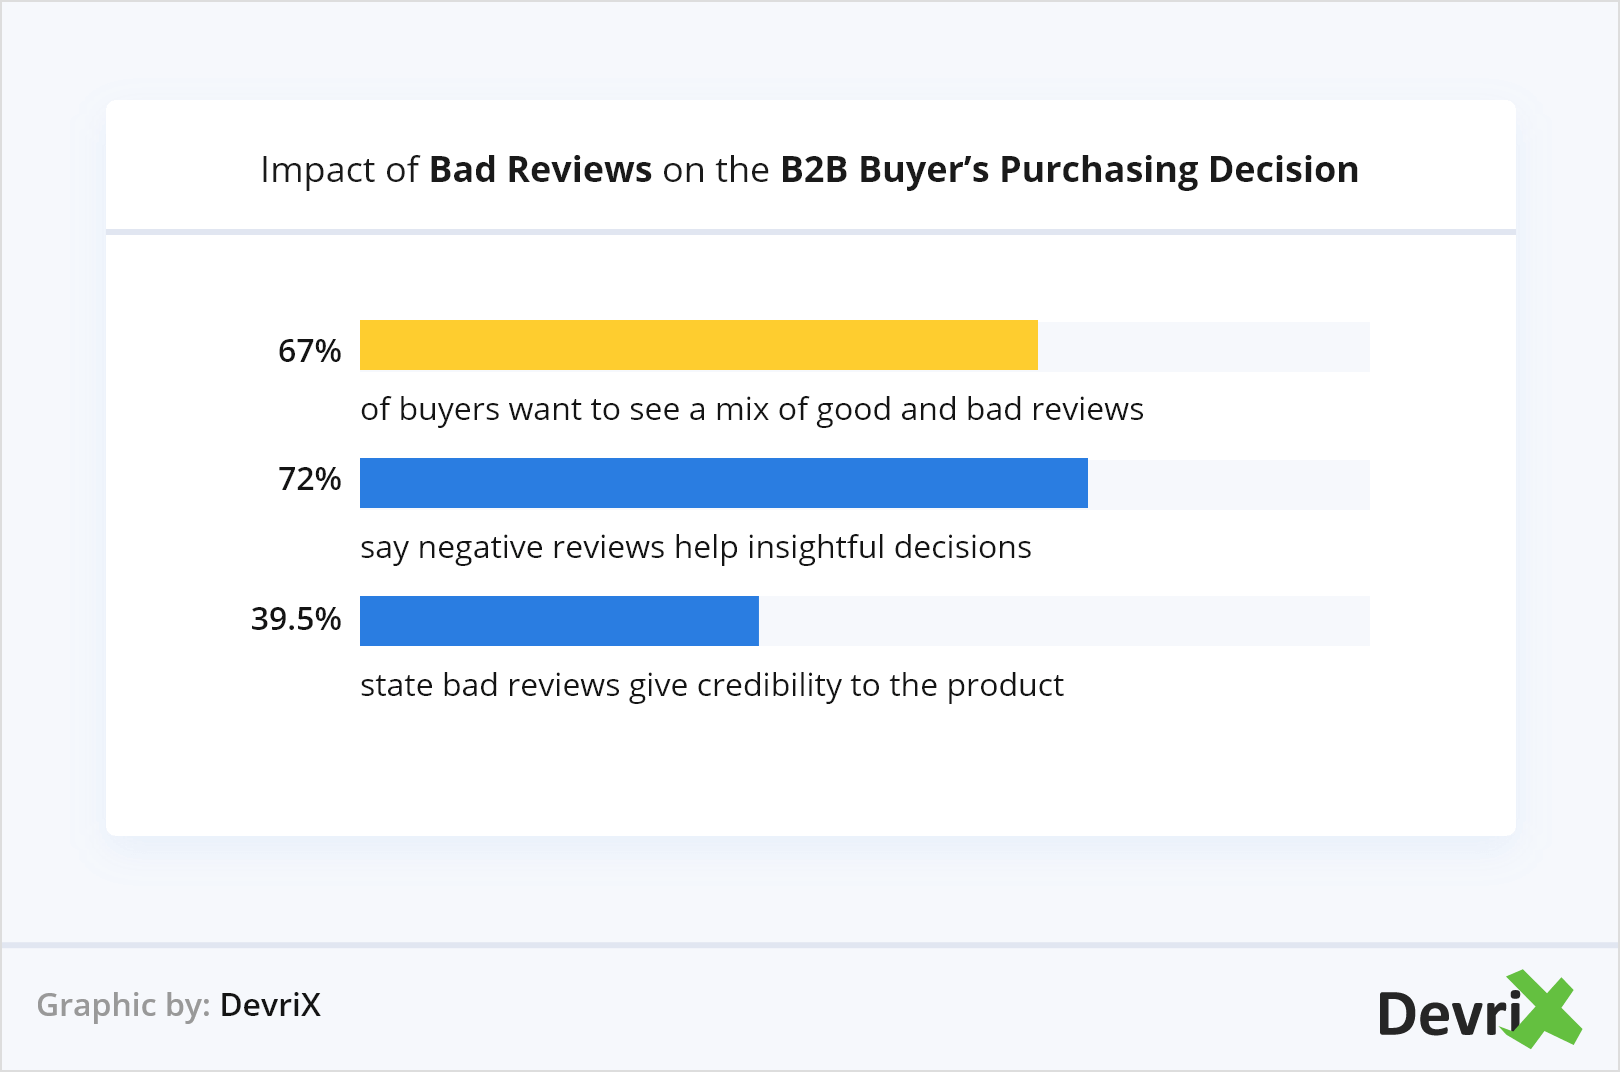 Impact of Bad Reviews on the B2B Buyer’s Purchasing Decision